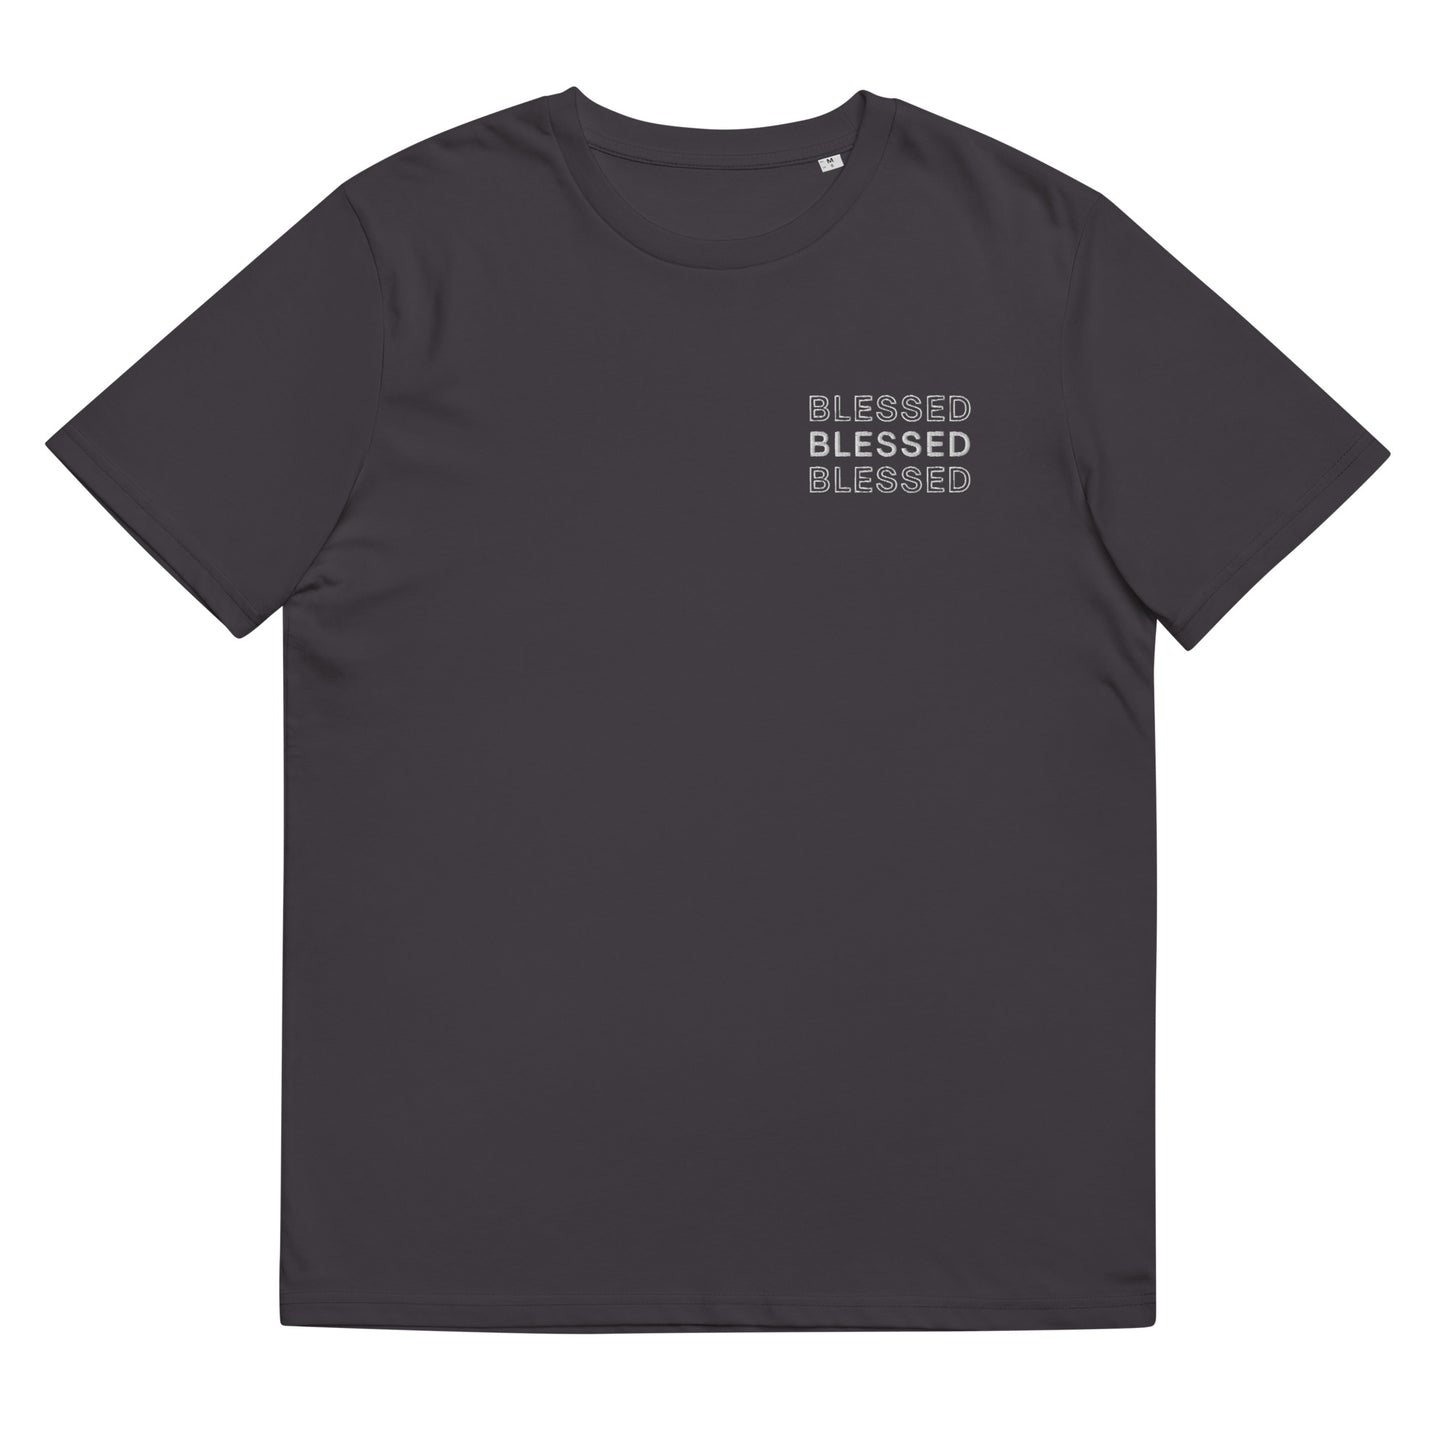 BLESSED T-shirt